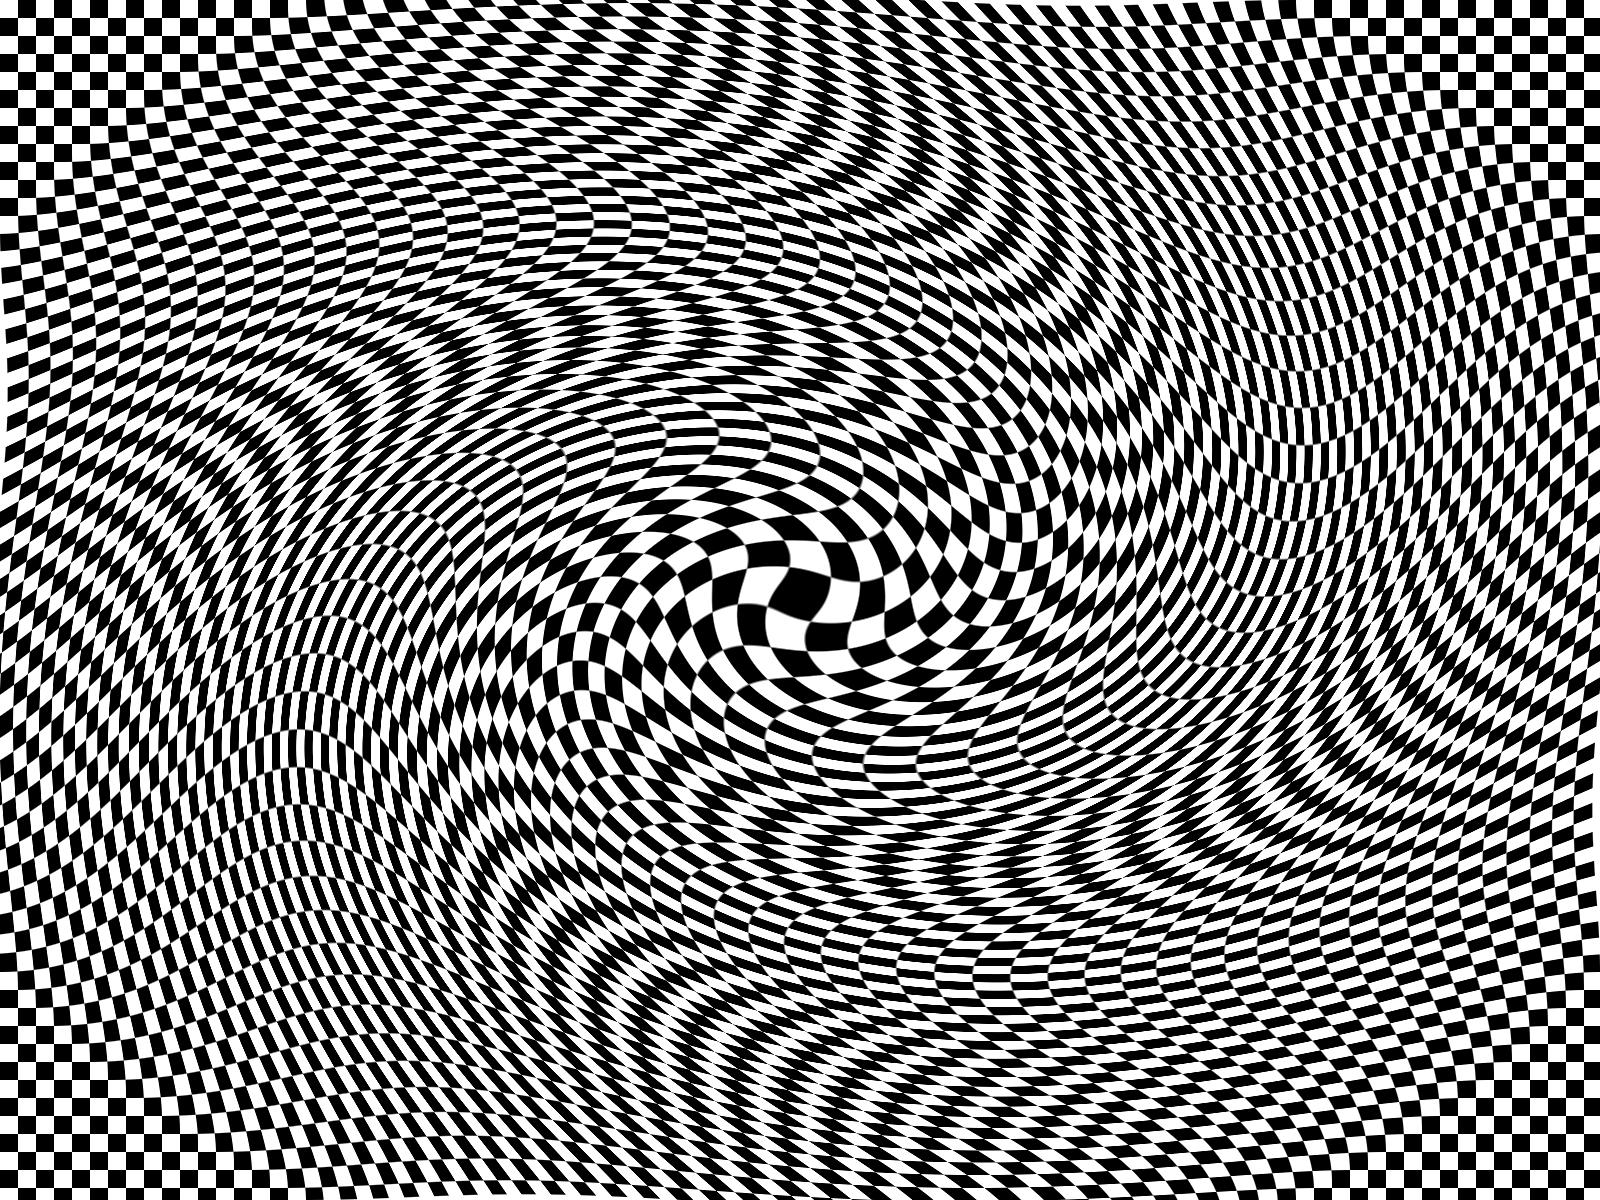 Optical illusions backgrounds for desktop